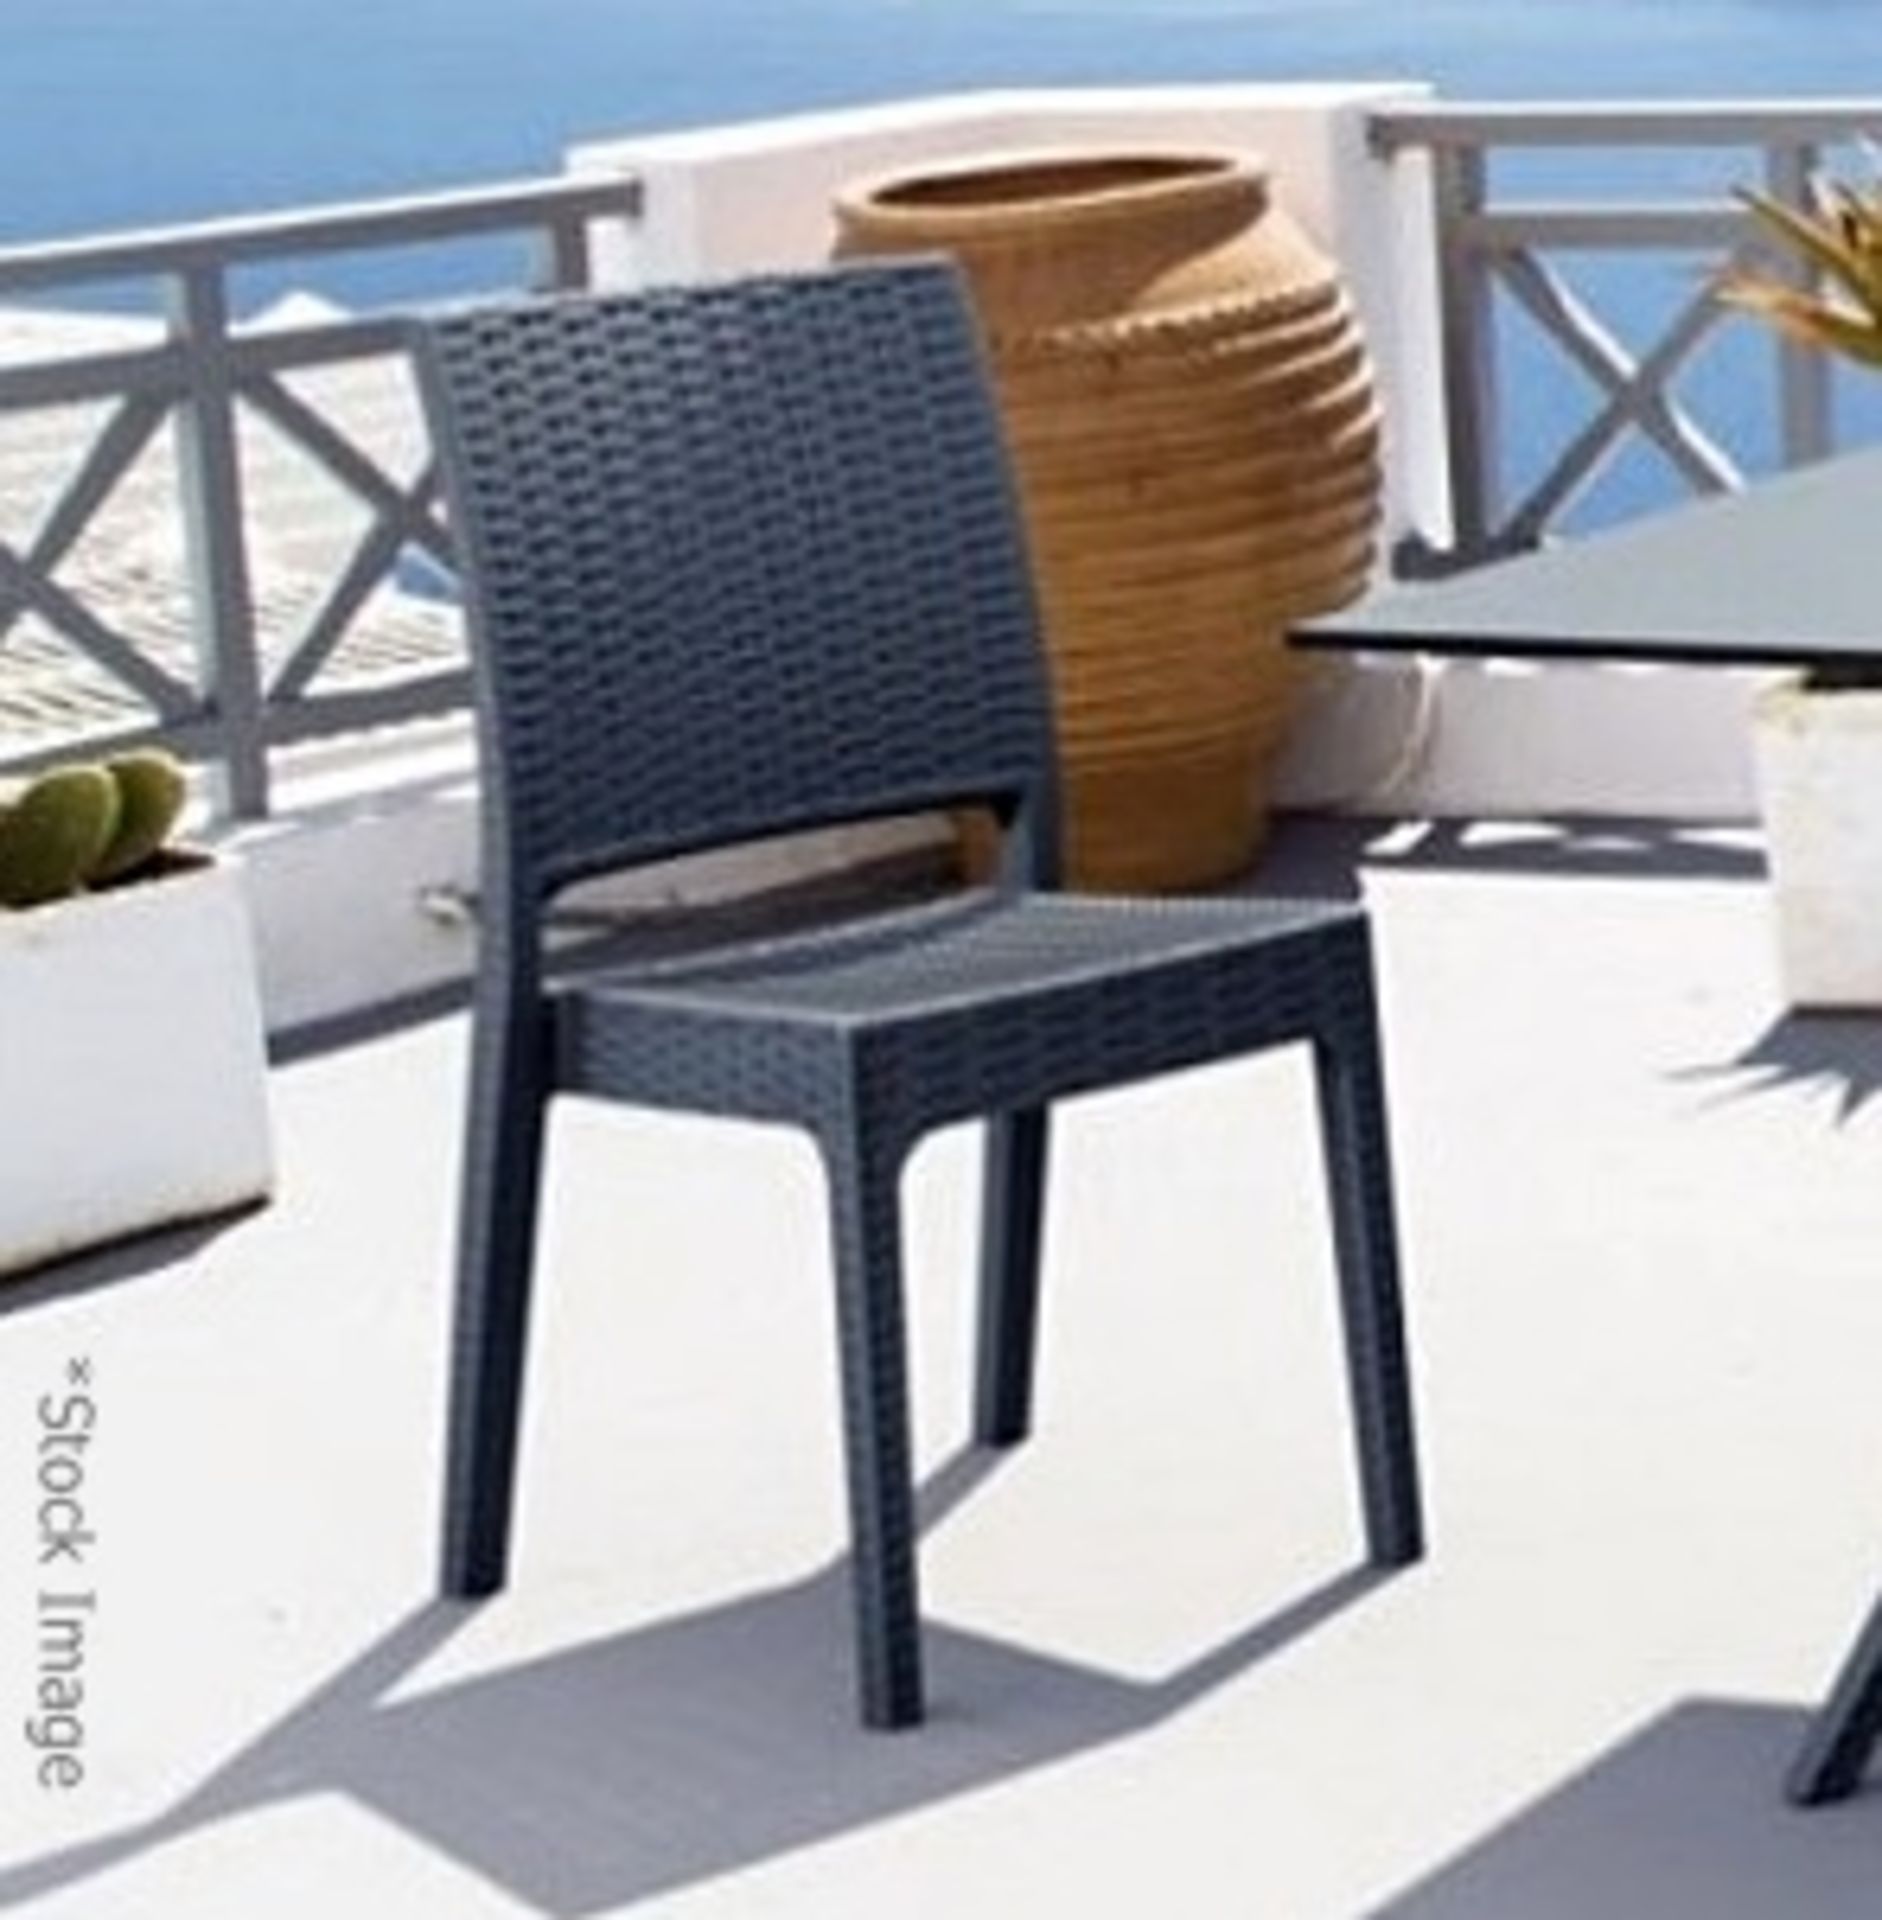 4 x Siesta 'Florida' Rattan Style Garden Chairs In Dark Grey - Suitable For Commercial or Home Use - - Image 11 of 21